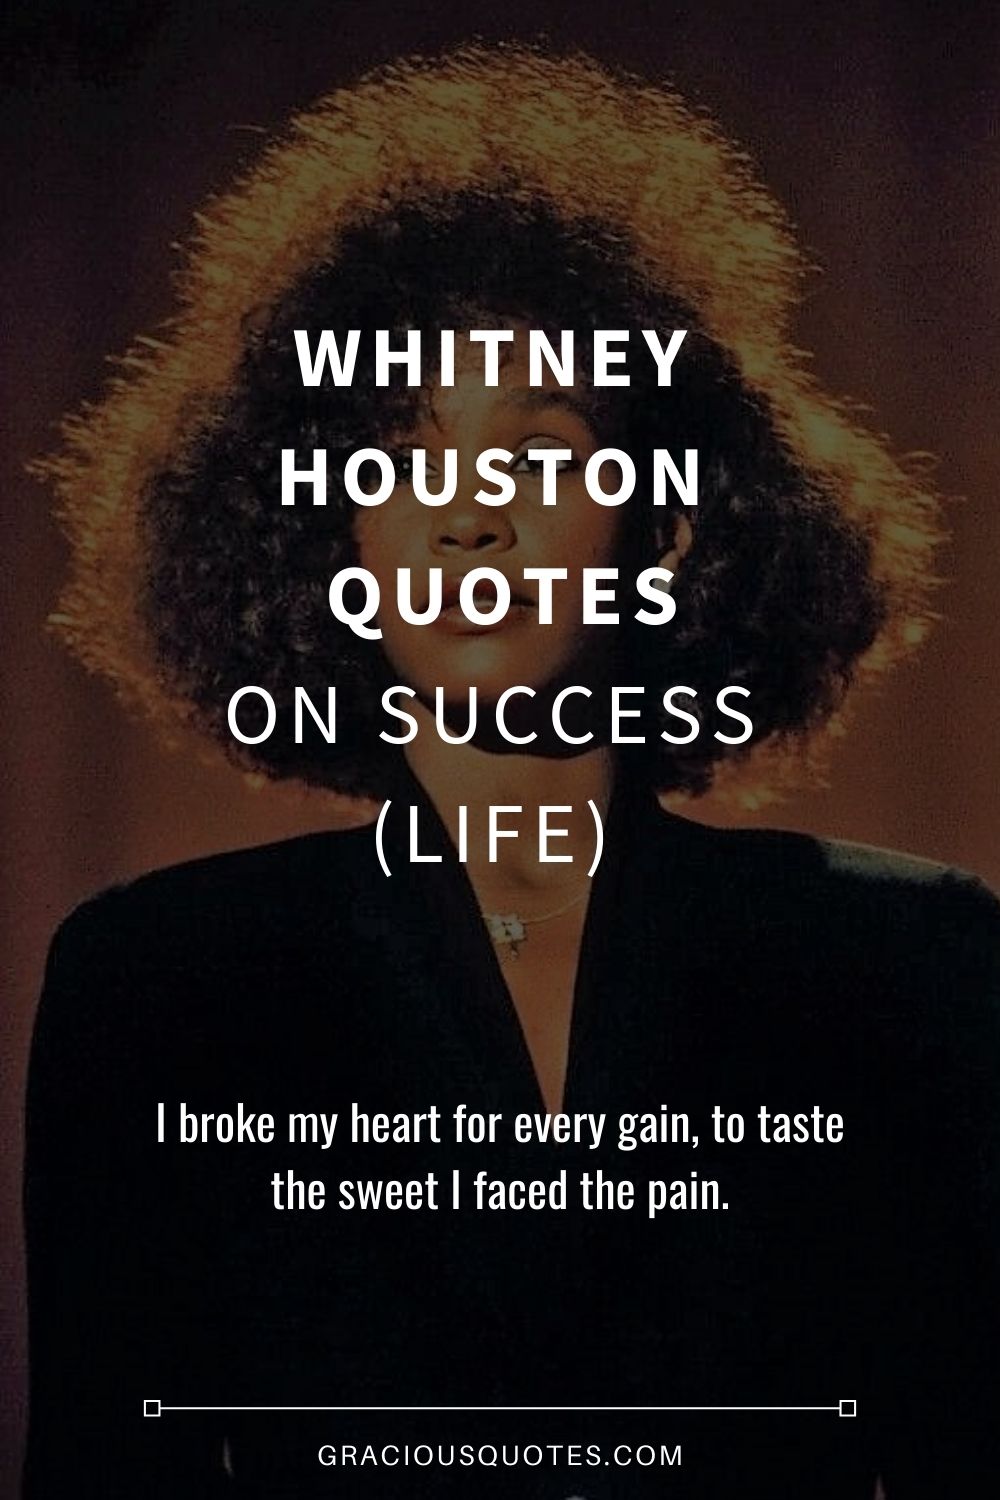 Whitney Houston Quotes on Success (LIFE) - Gracious Quotes